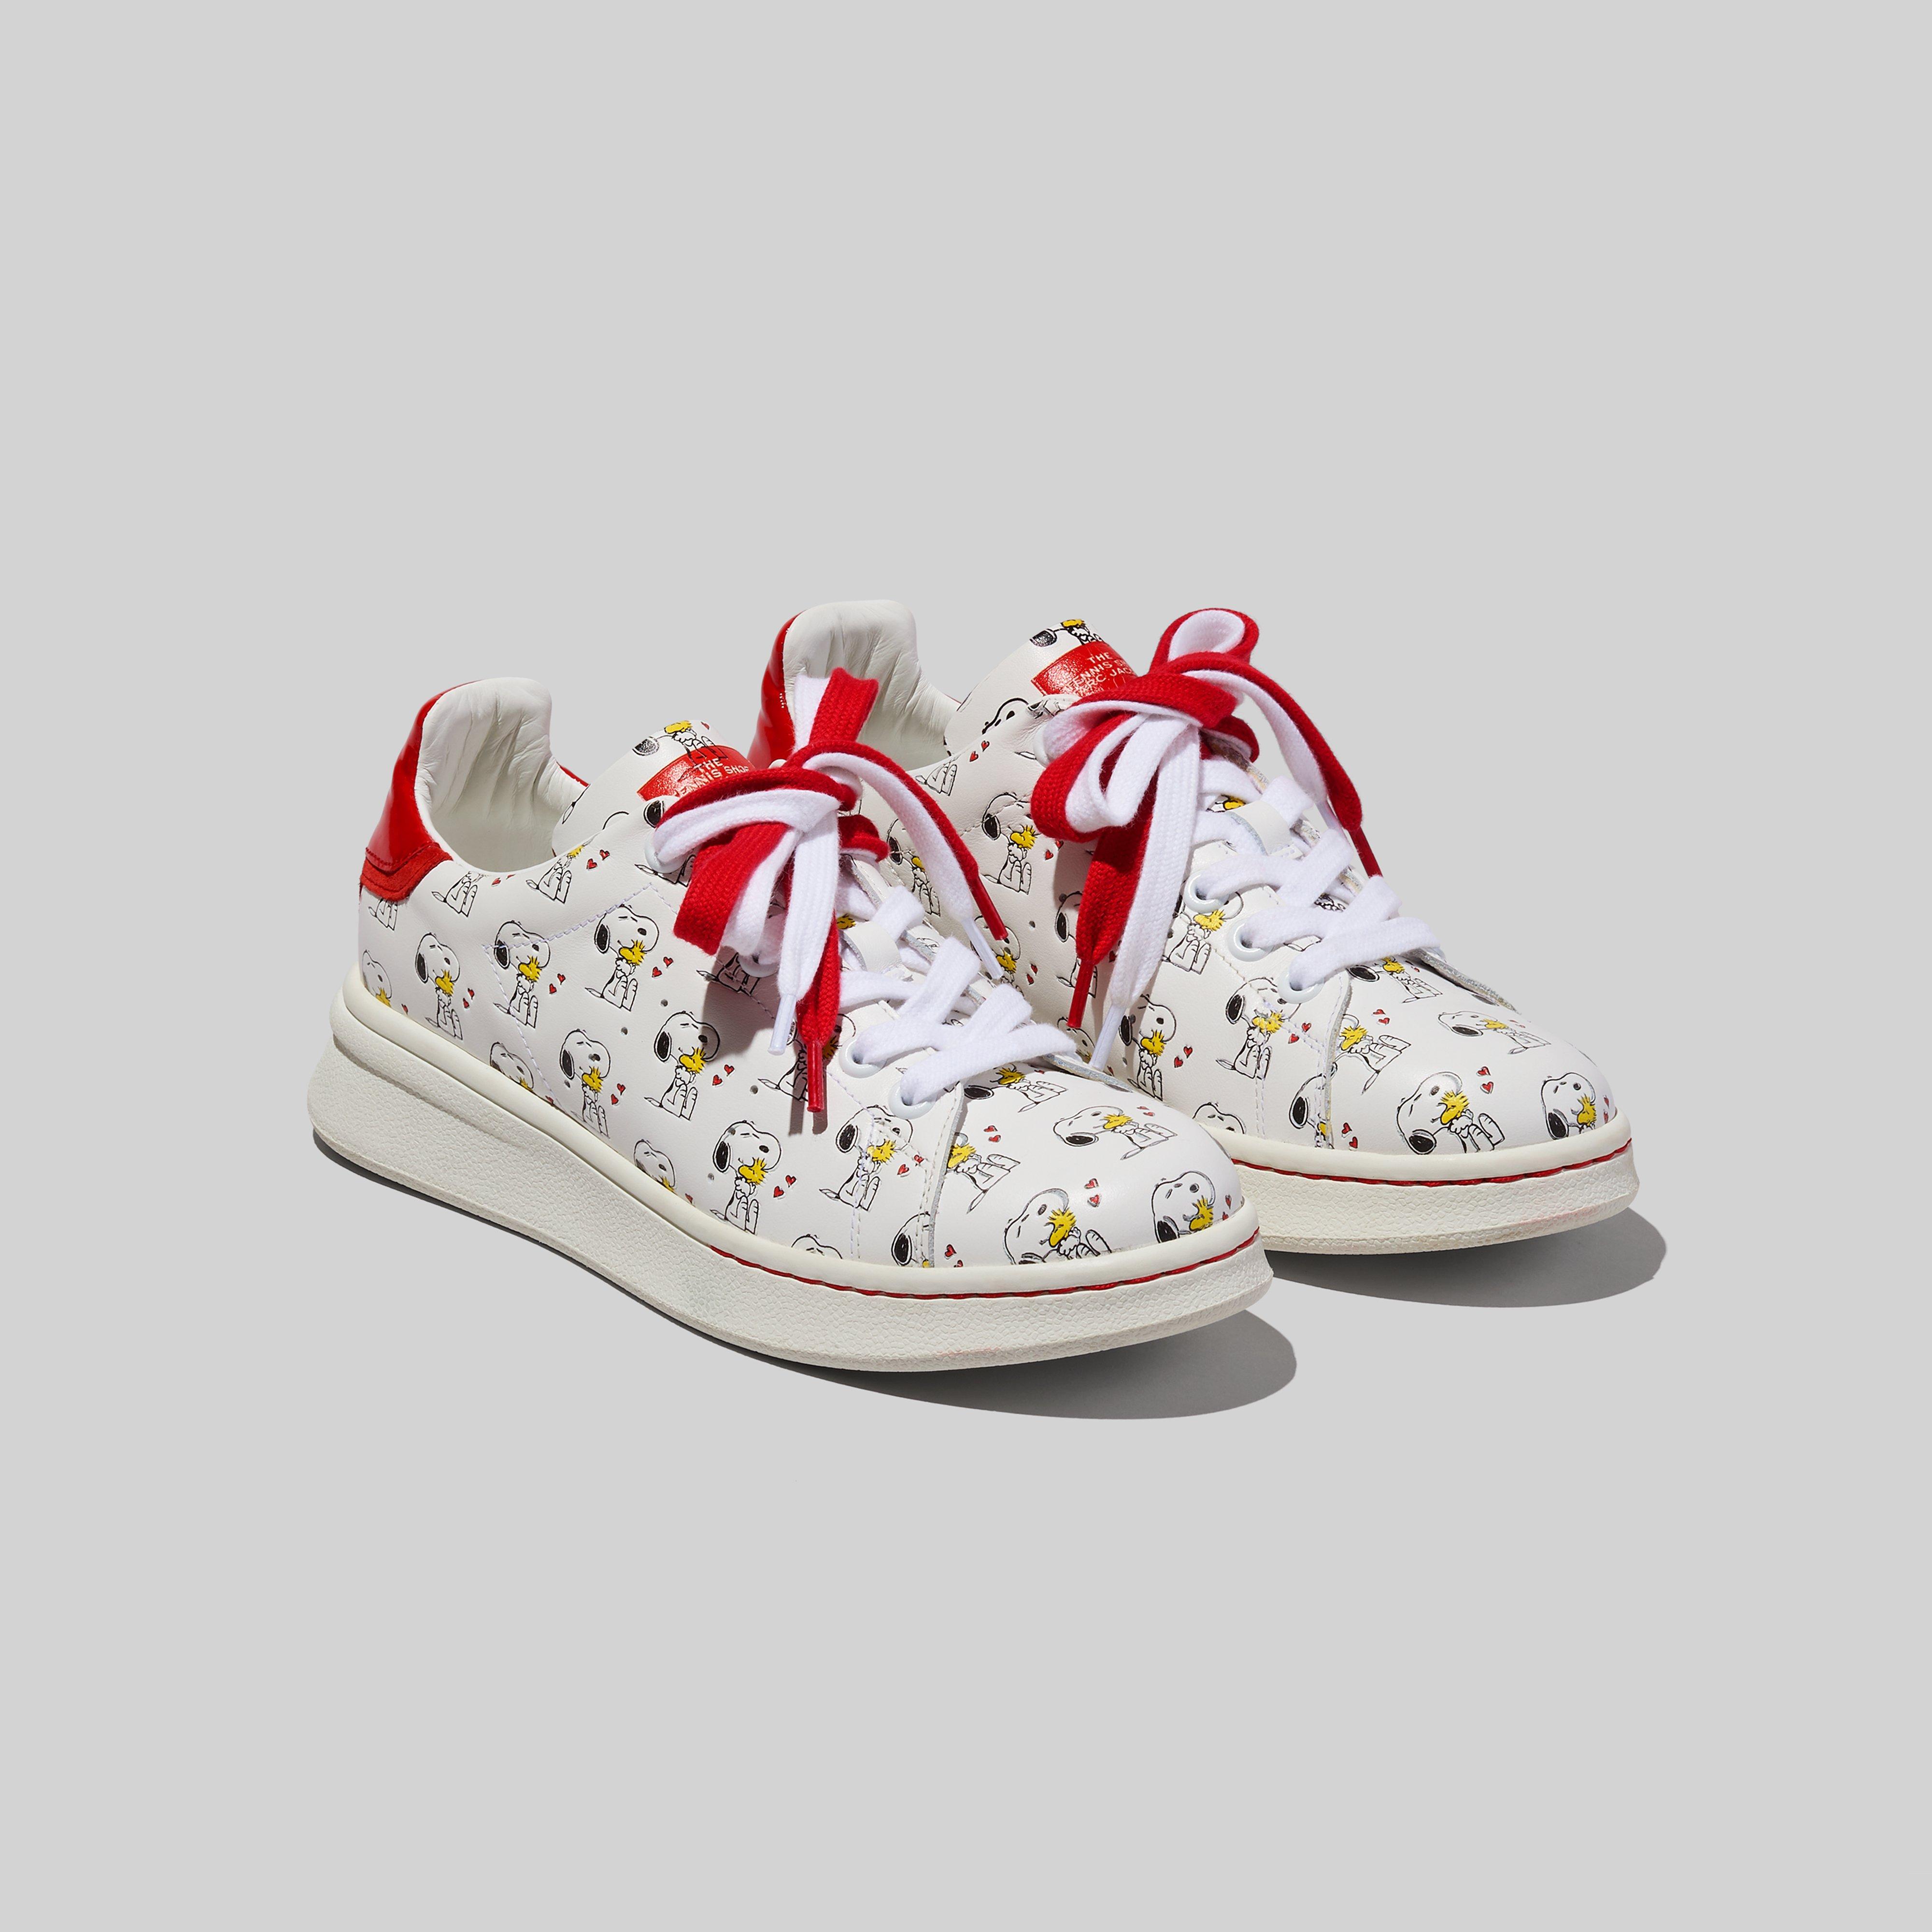 snoopy tennis shoes